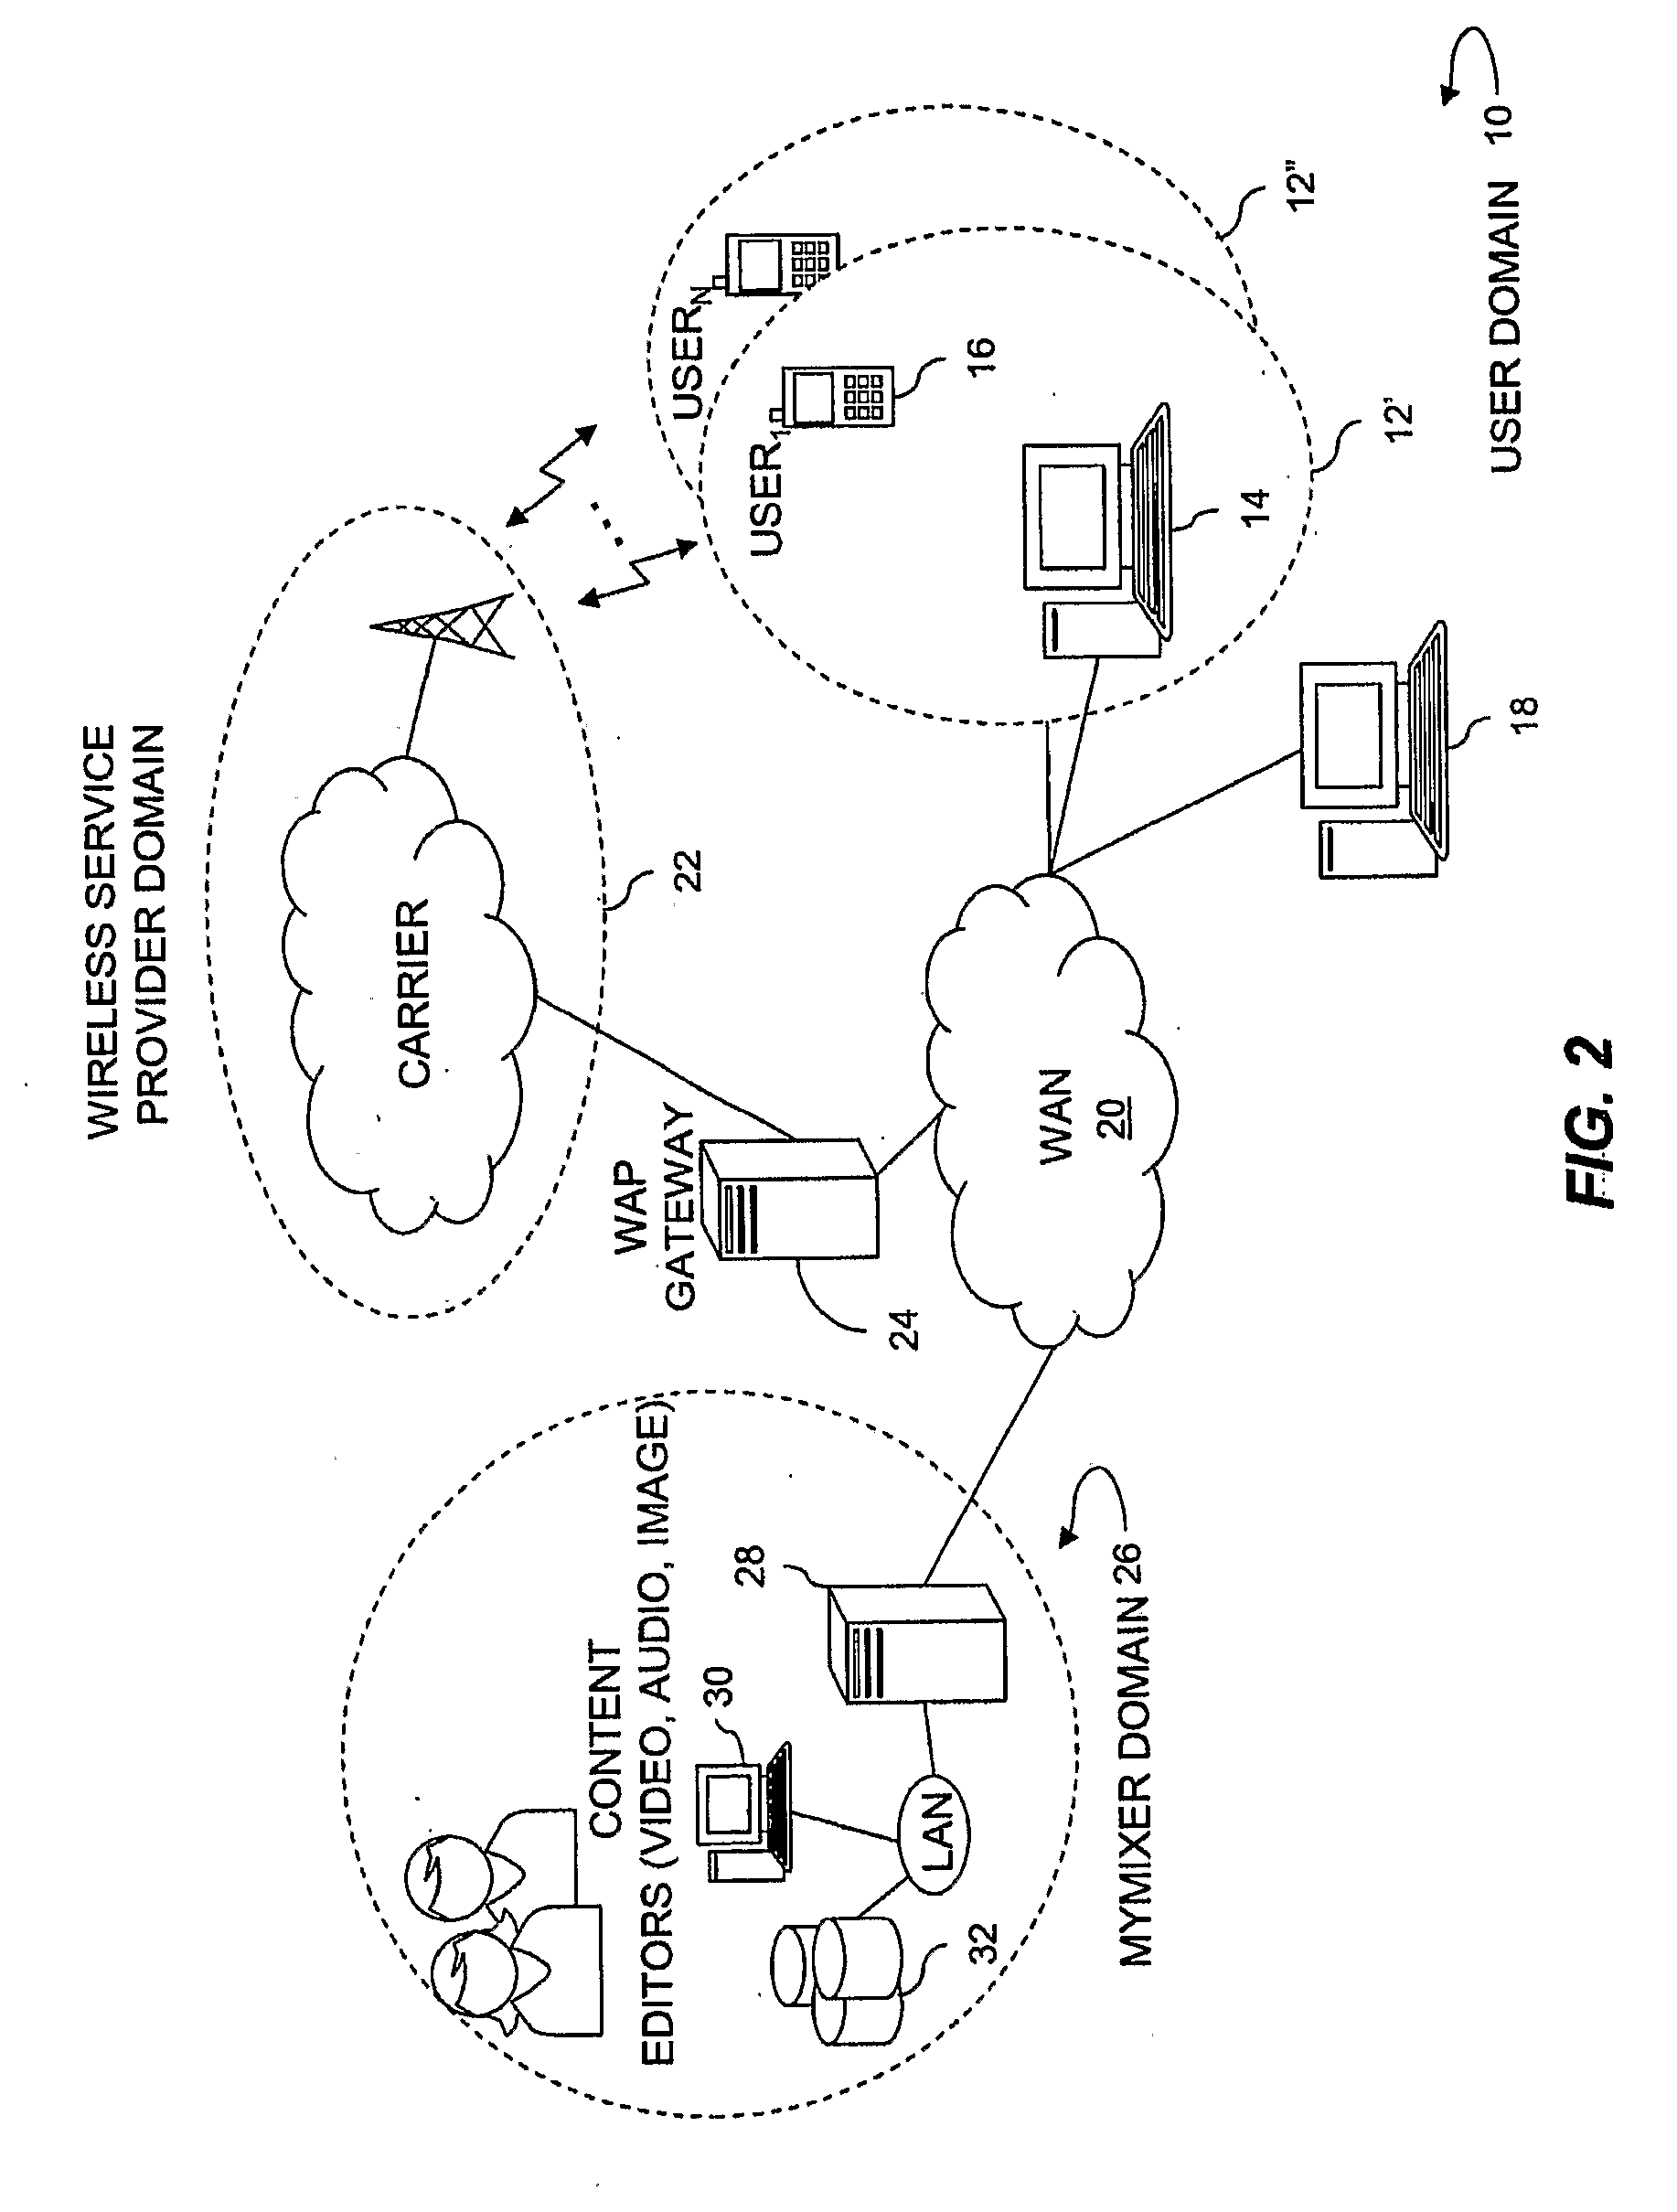 System and method for mobile content generation